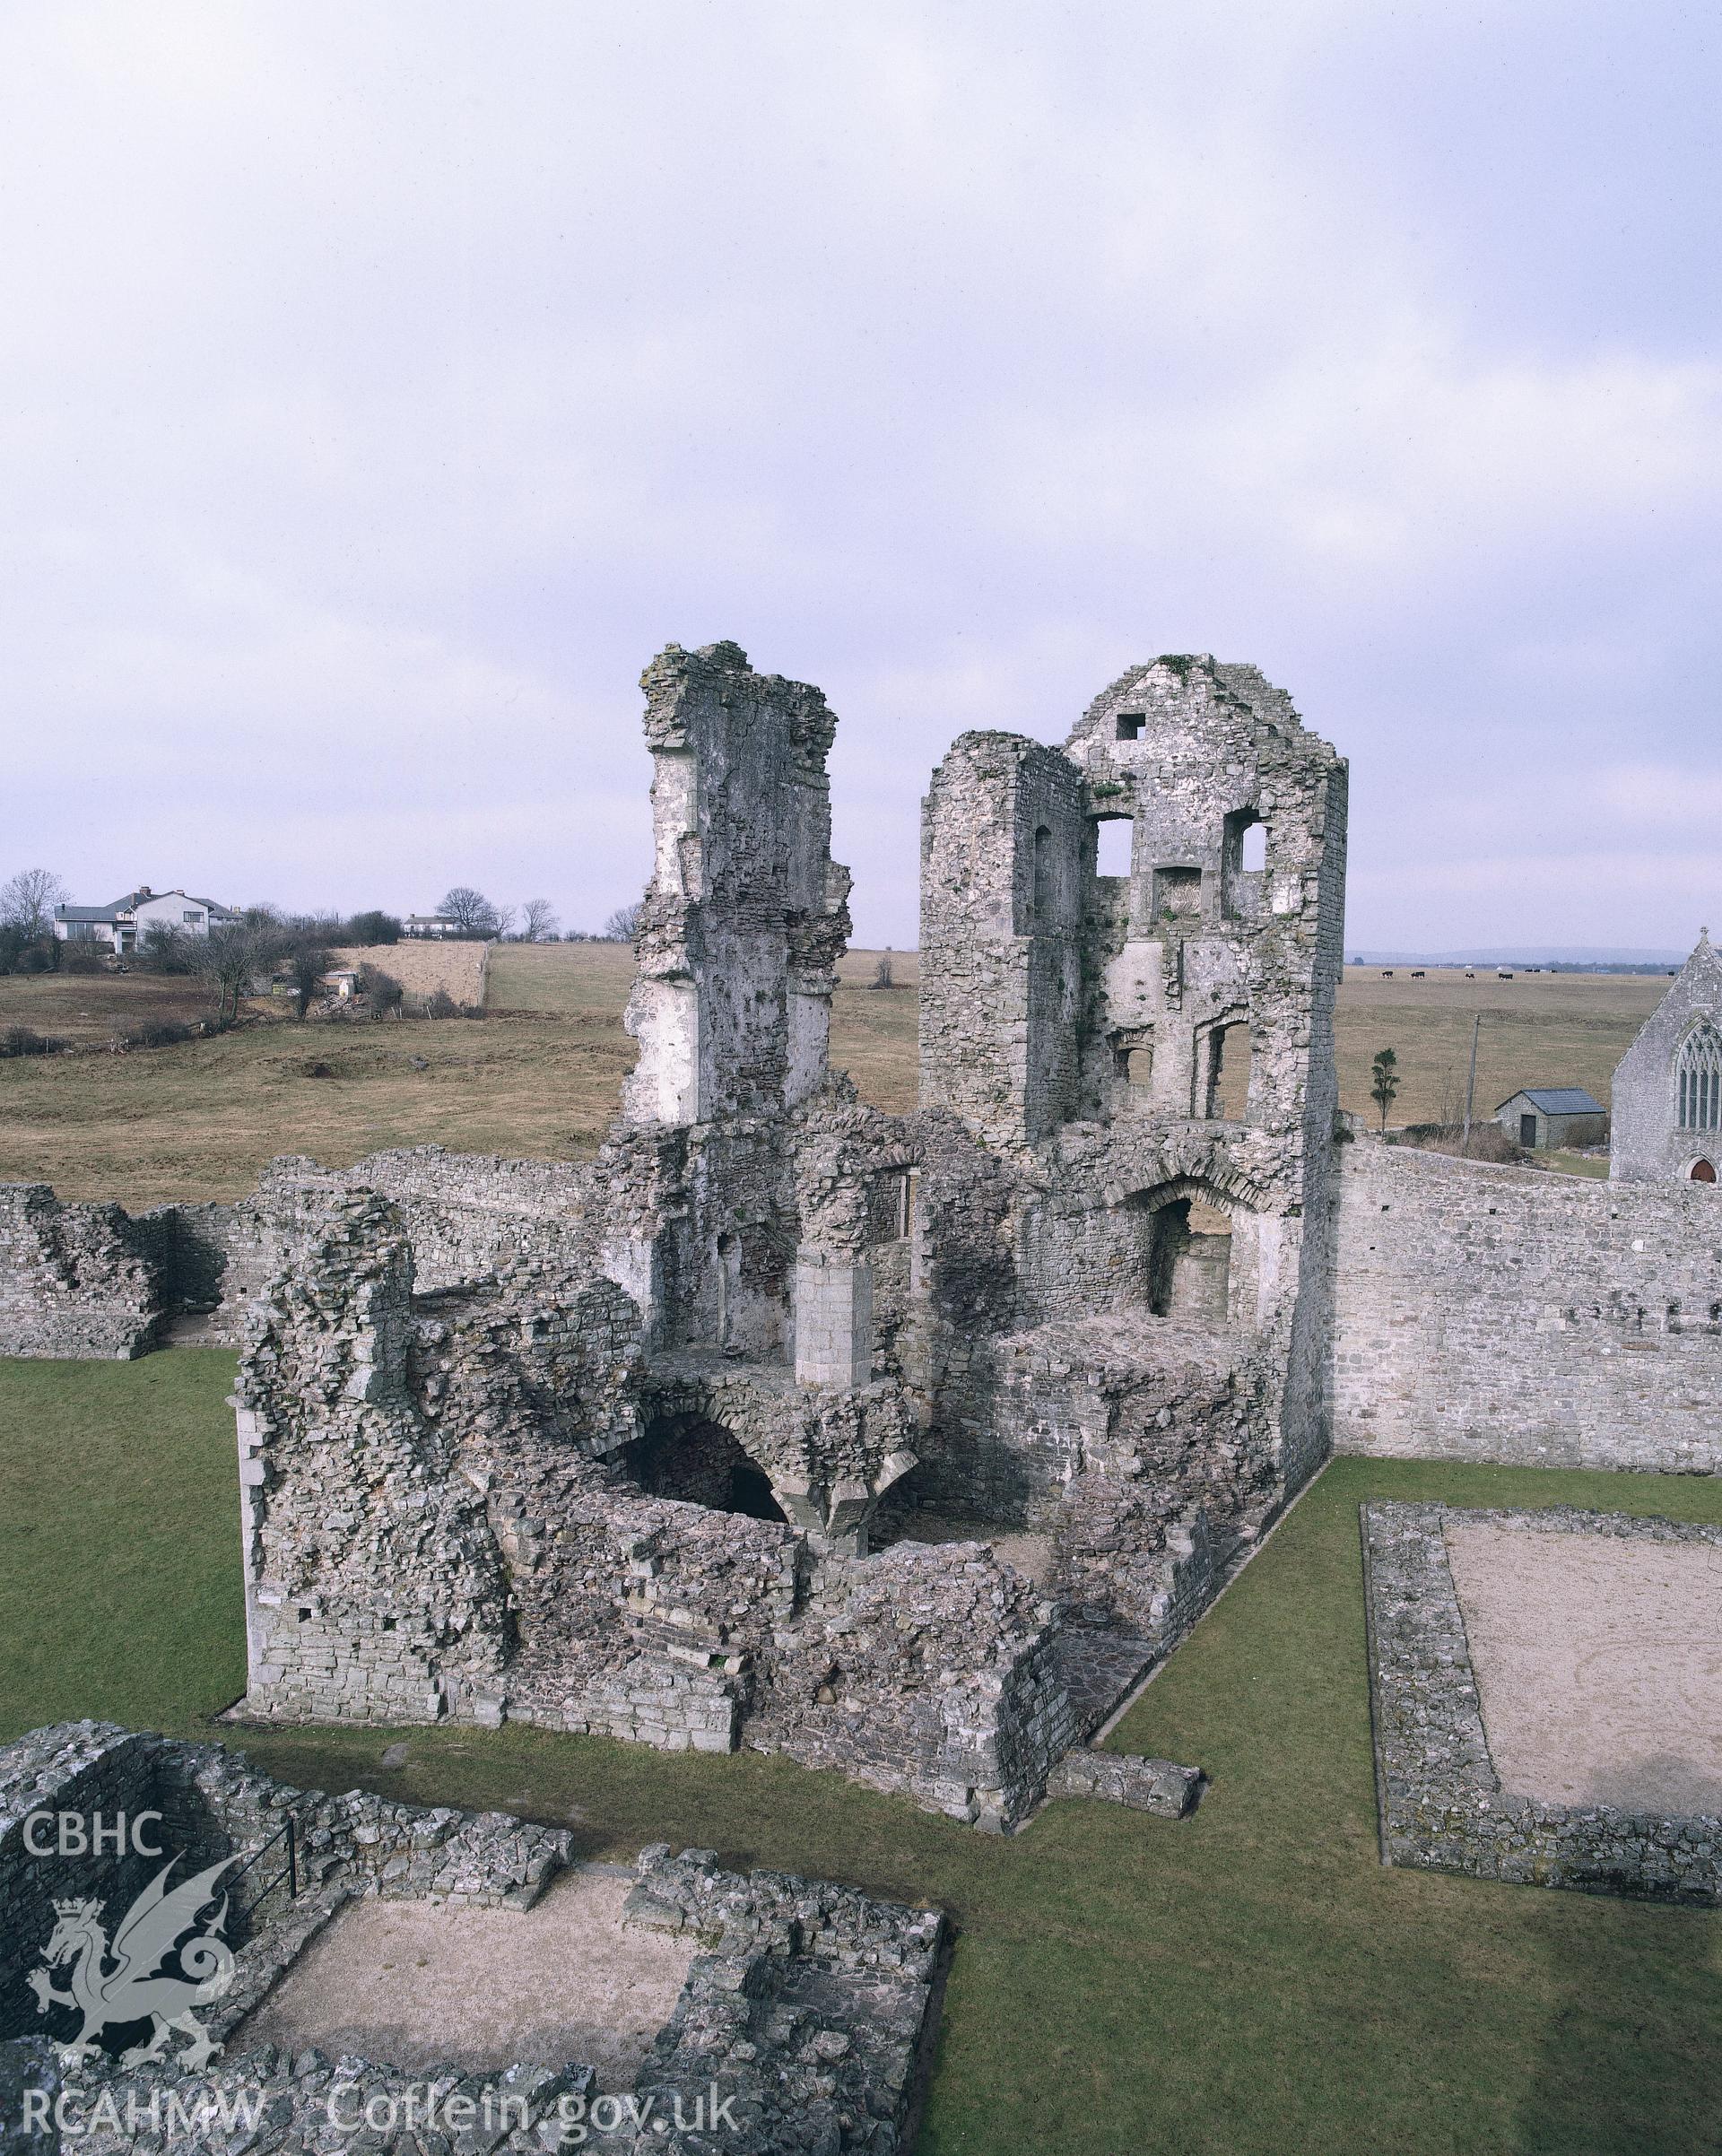 RCAHMW colour transparency showing view of Coity Castle.